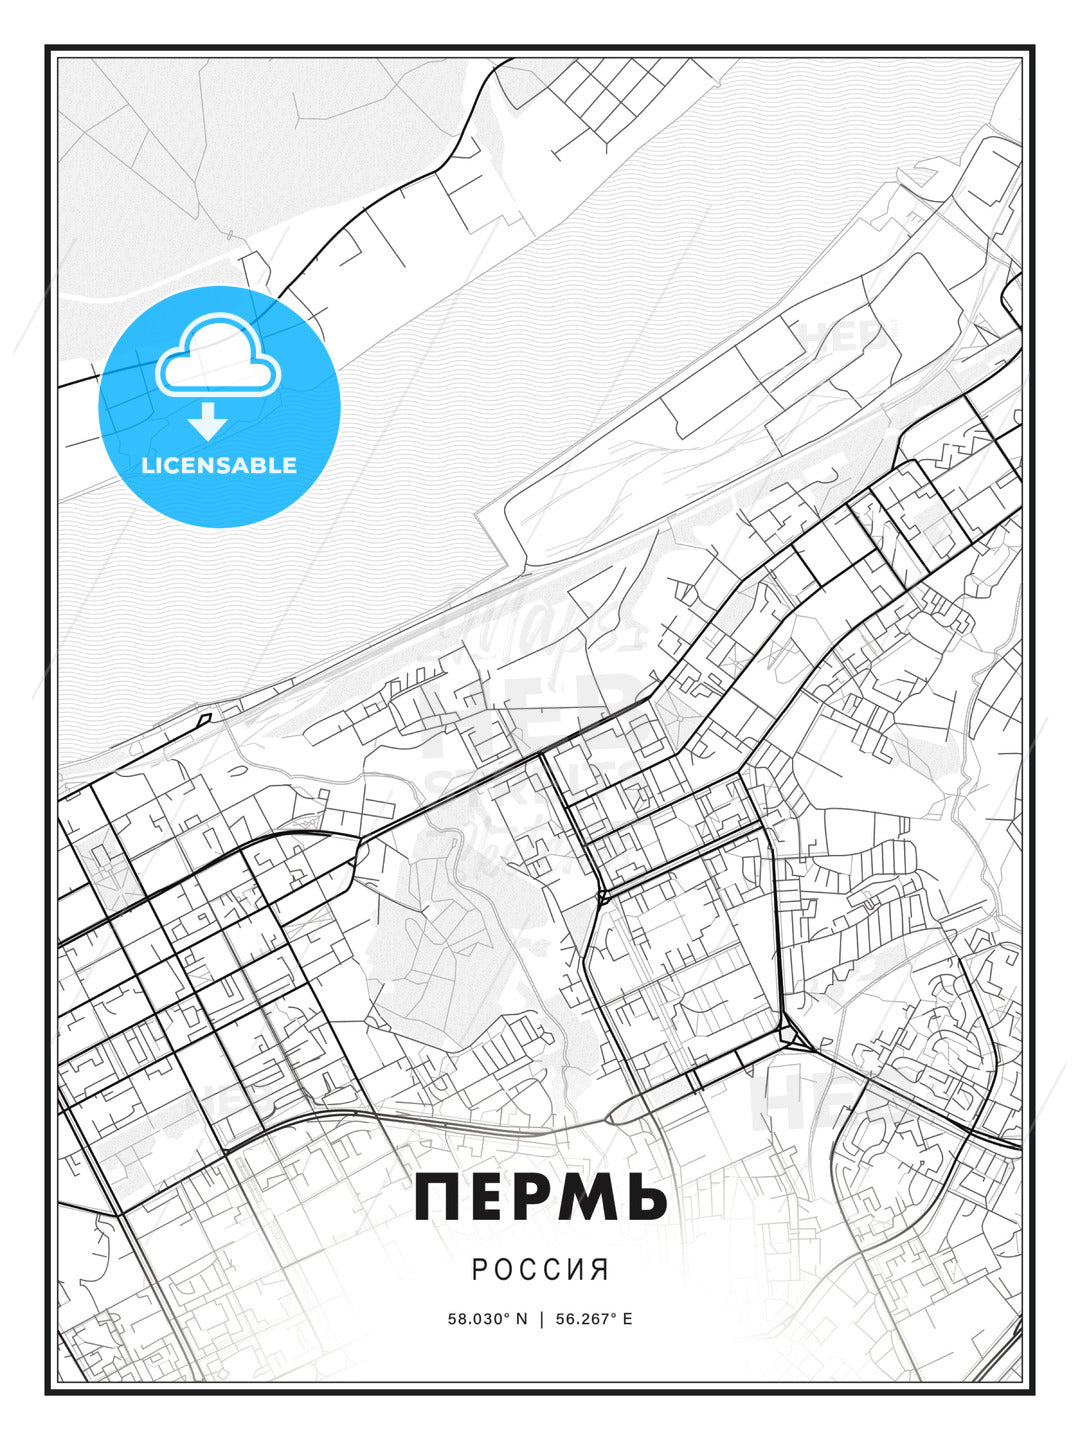 ПЕРМЬ / Perm, Russia, Modern Print Template in Various Formats - HEBSTREITS Sketches